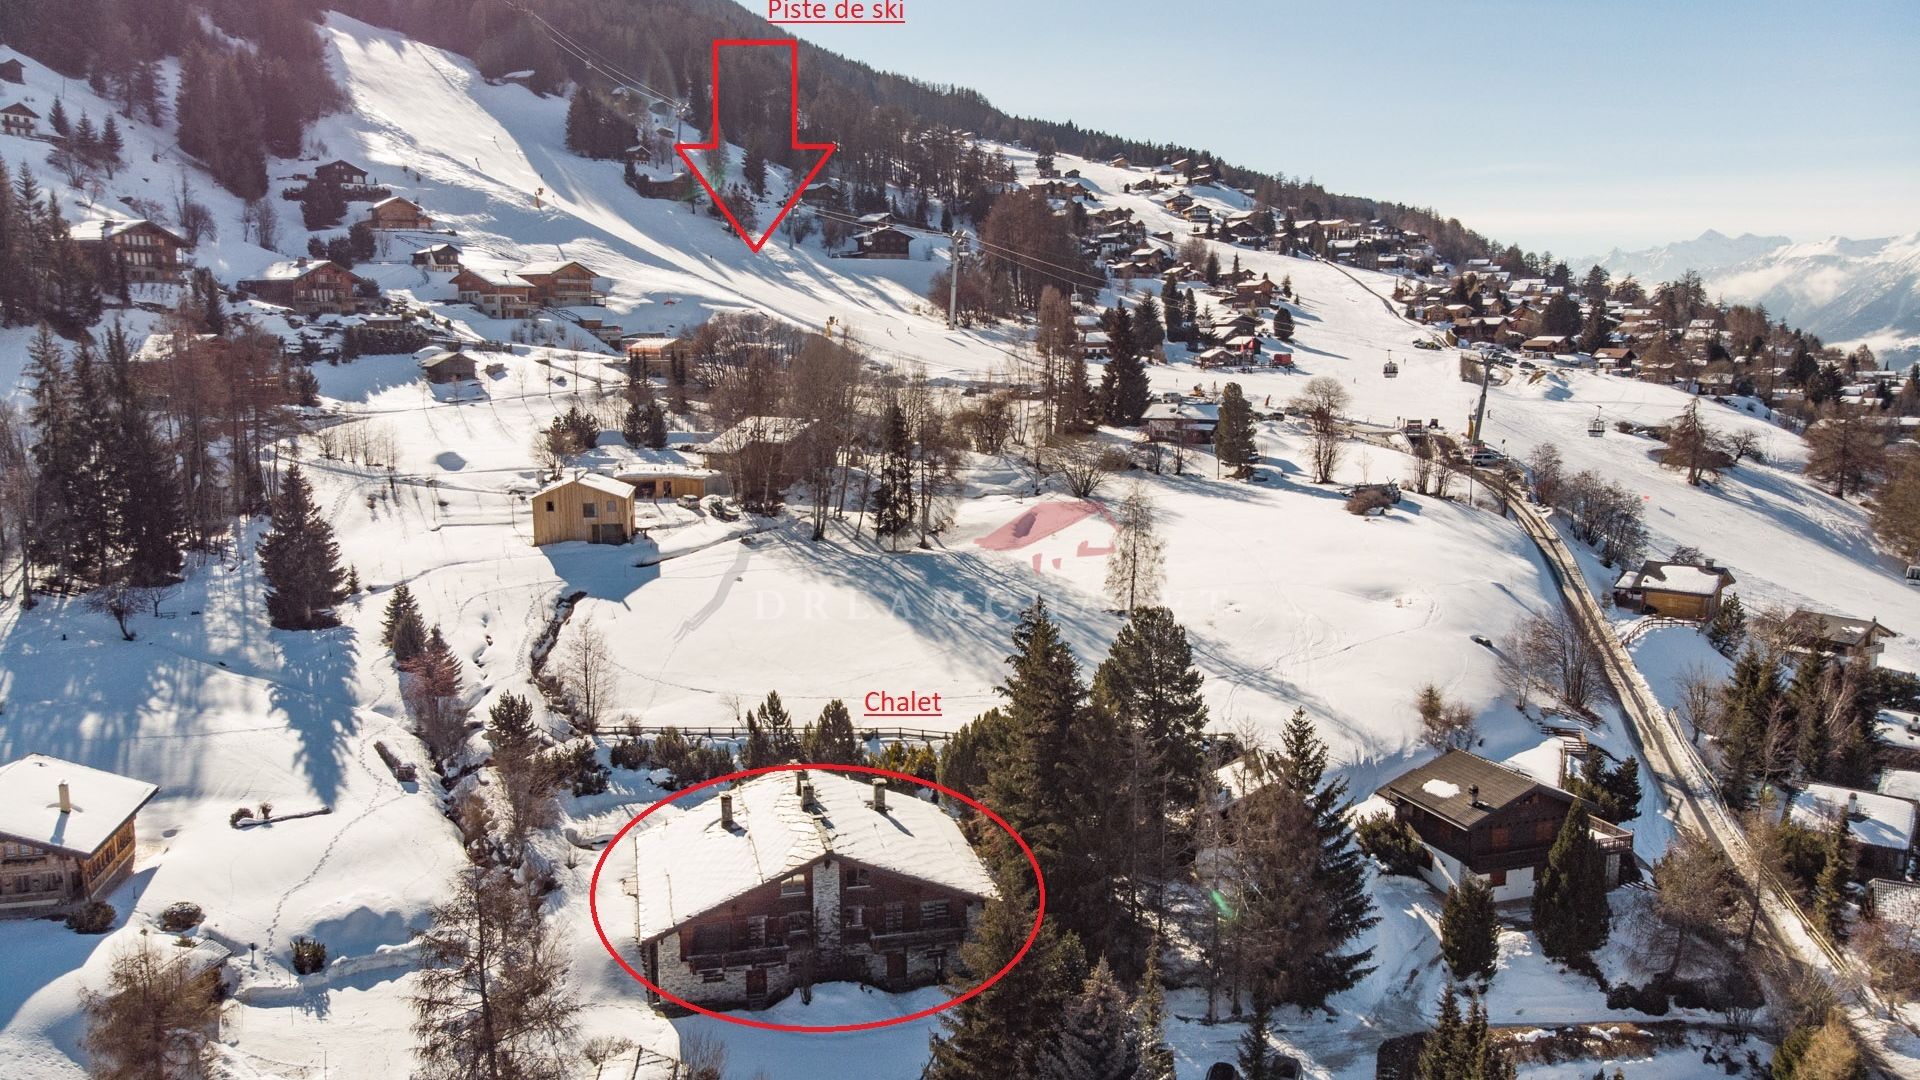 Position in relation to the ski slopes